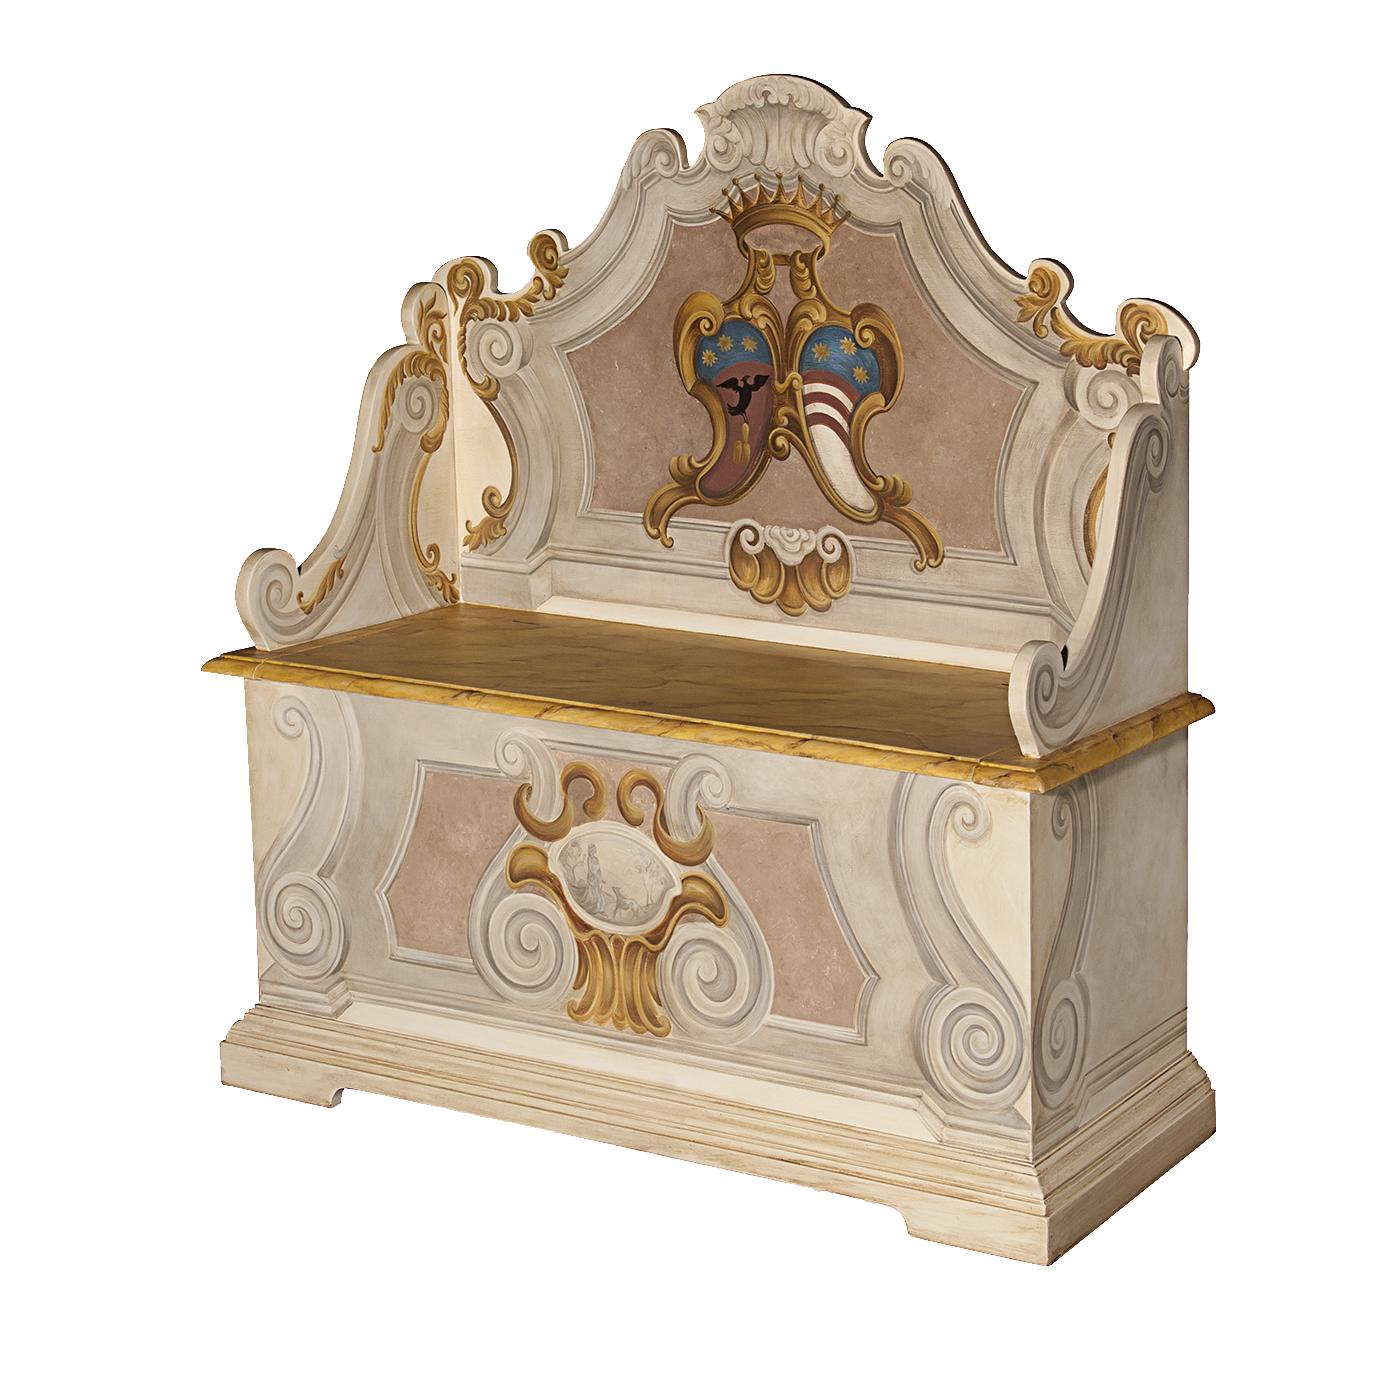 A superb objet d'art, this wooden chest was crafted according to traditional methods to reproduce old-fashioned blanket chests. A versatile addition to a classic home, it can be used as a love seat in an entryway, as additional seat in a living